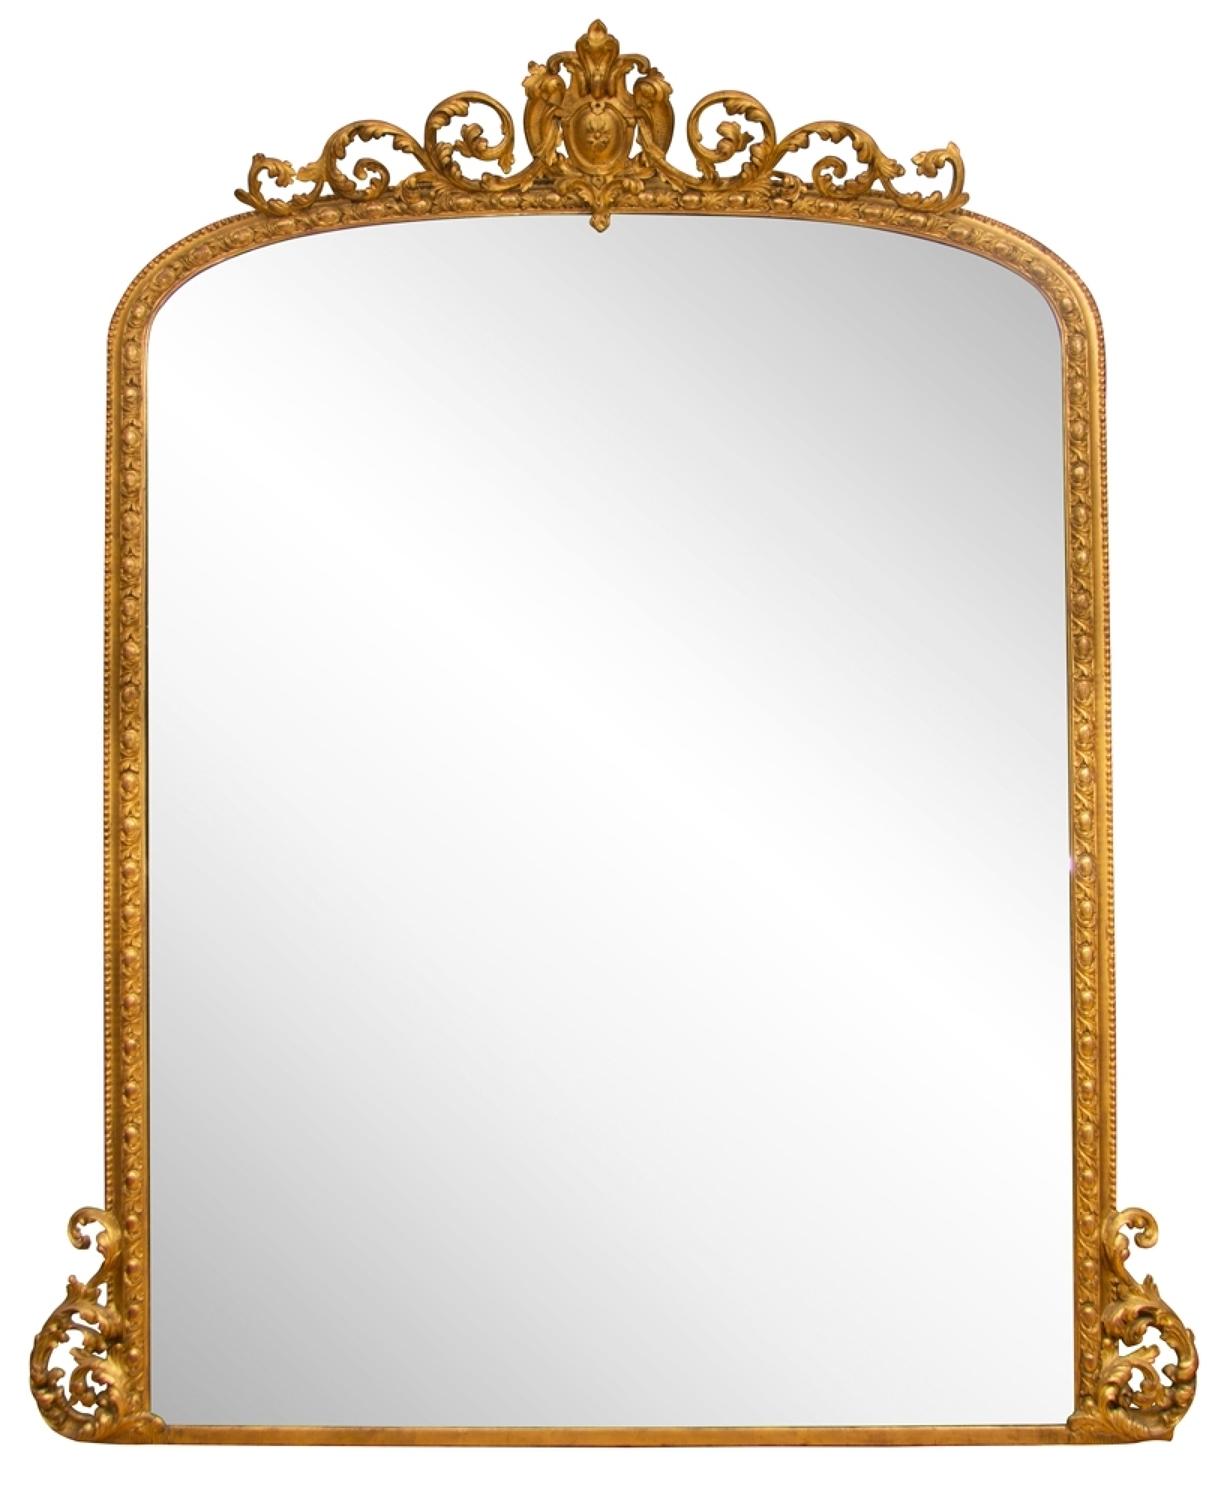 An English Antique gilded overmantle mirror